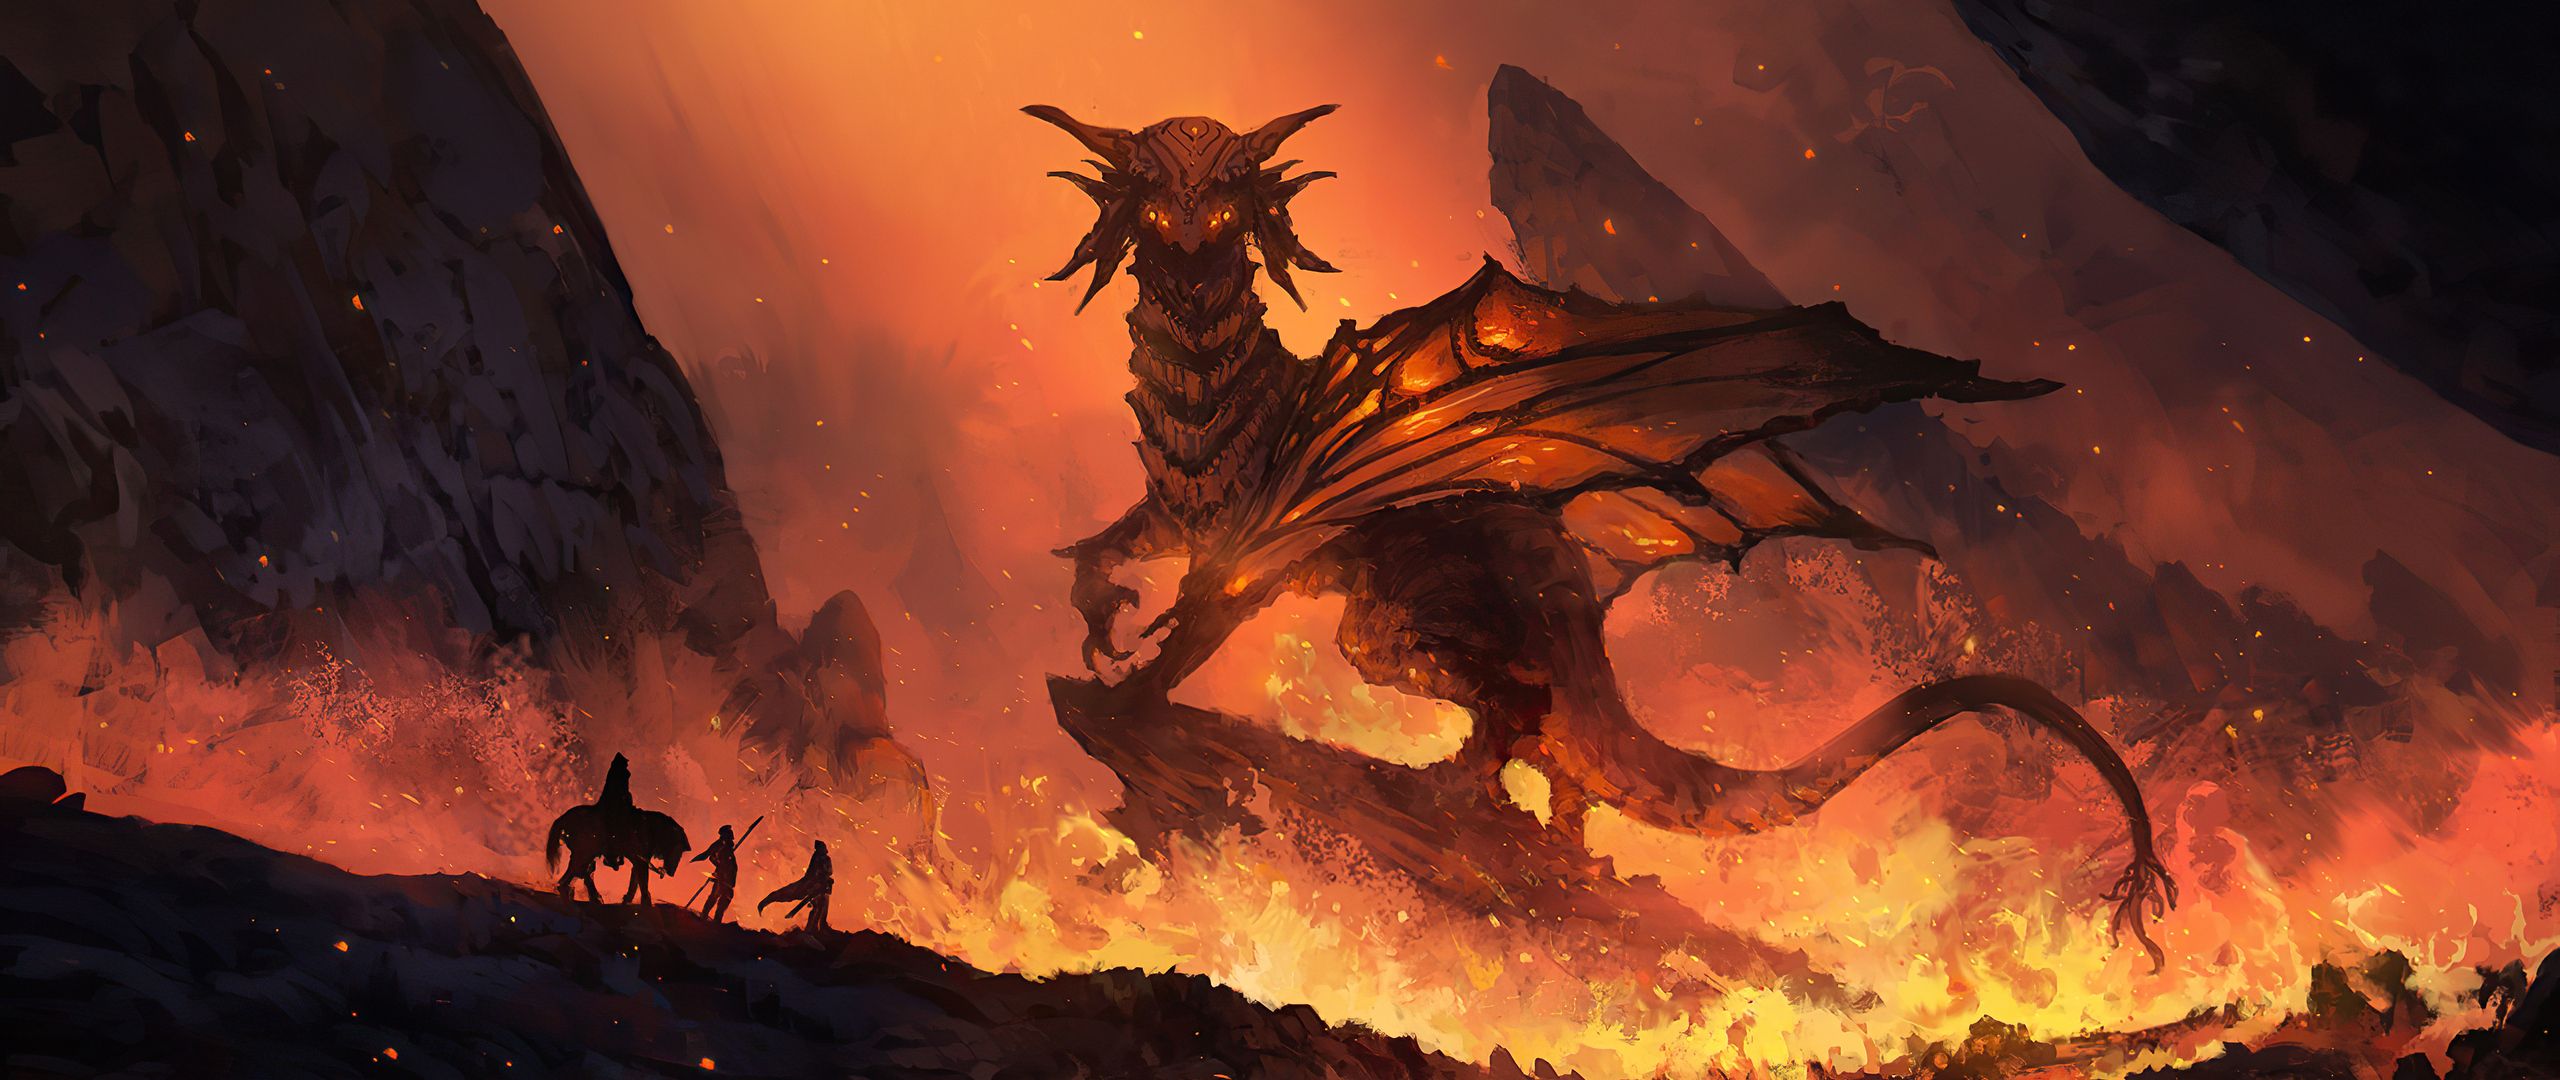 God Of Fire Dragon 4k 2560x1080 Resolution HD 4k Wallpaper, Image, Background, Photo and Picture